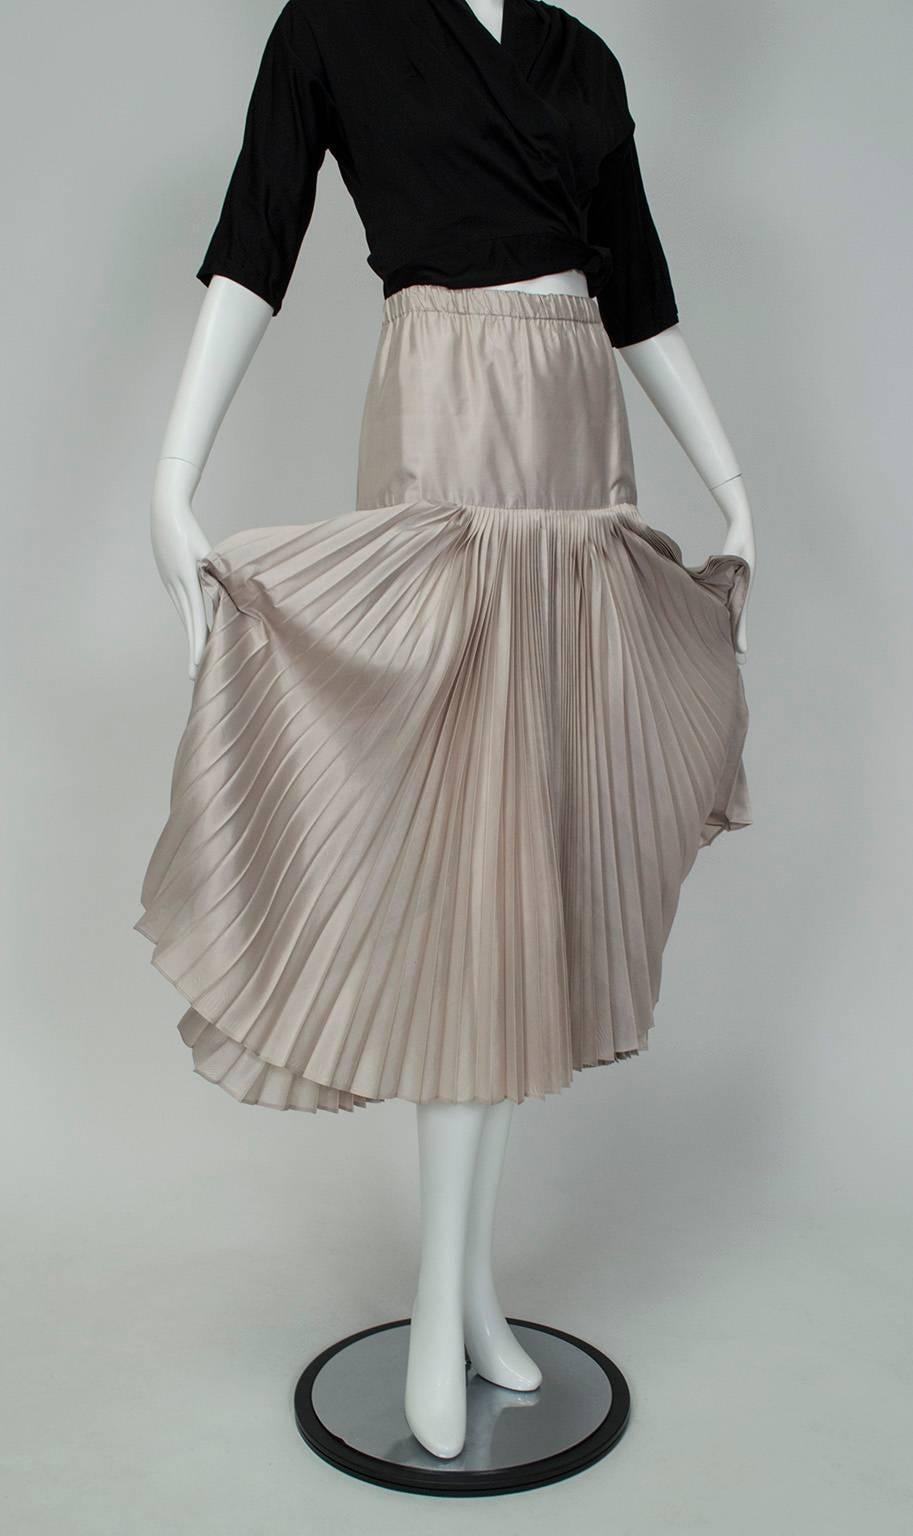 With thirteen yards of ultra-luxe accordion pleated silk, this skirt has enough fabric to make a full set of drapes (but the dramatic sweep, fetching rear slit and unusual changeante color wouldn't make nearly the impact on your walls as it will on